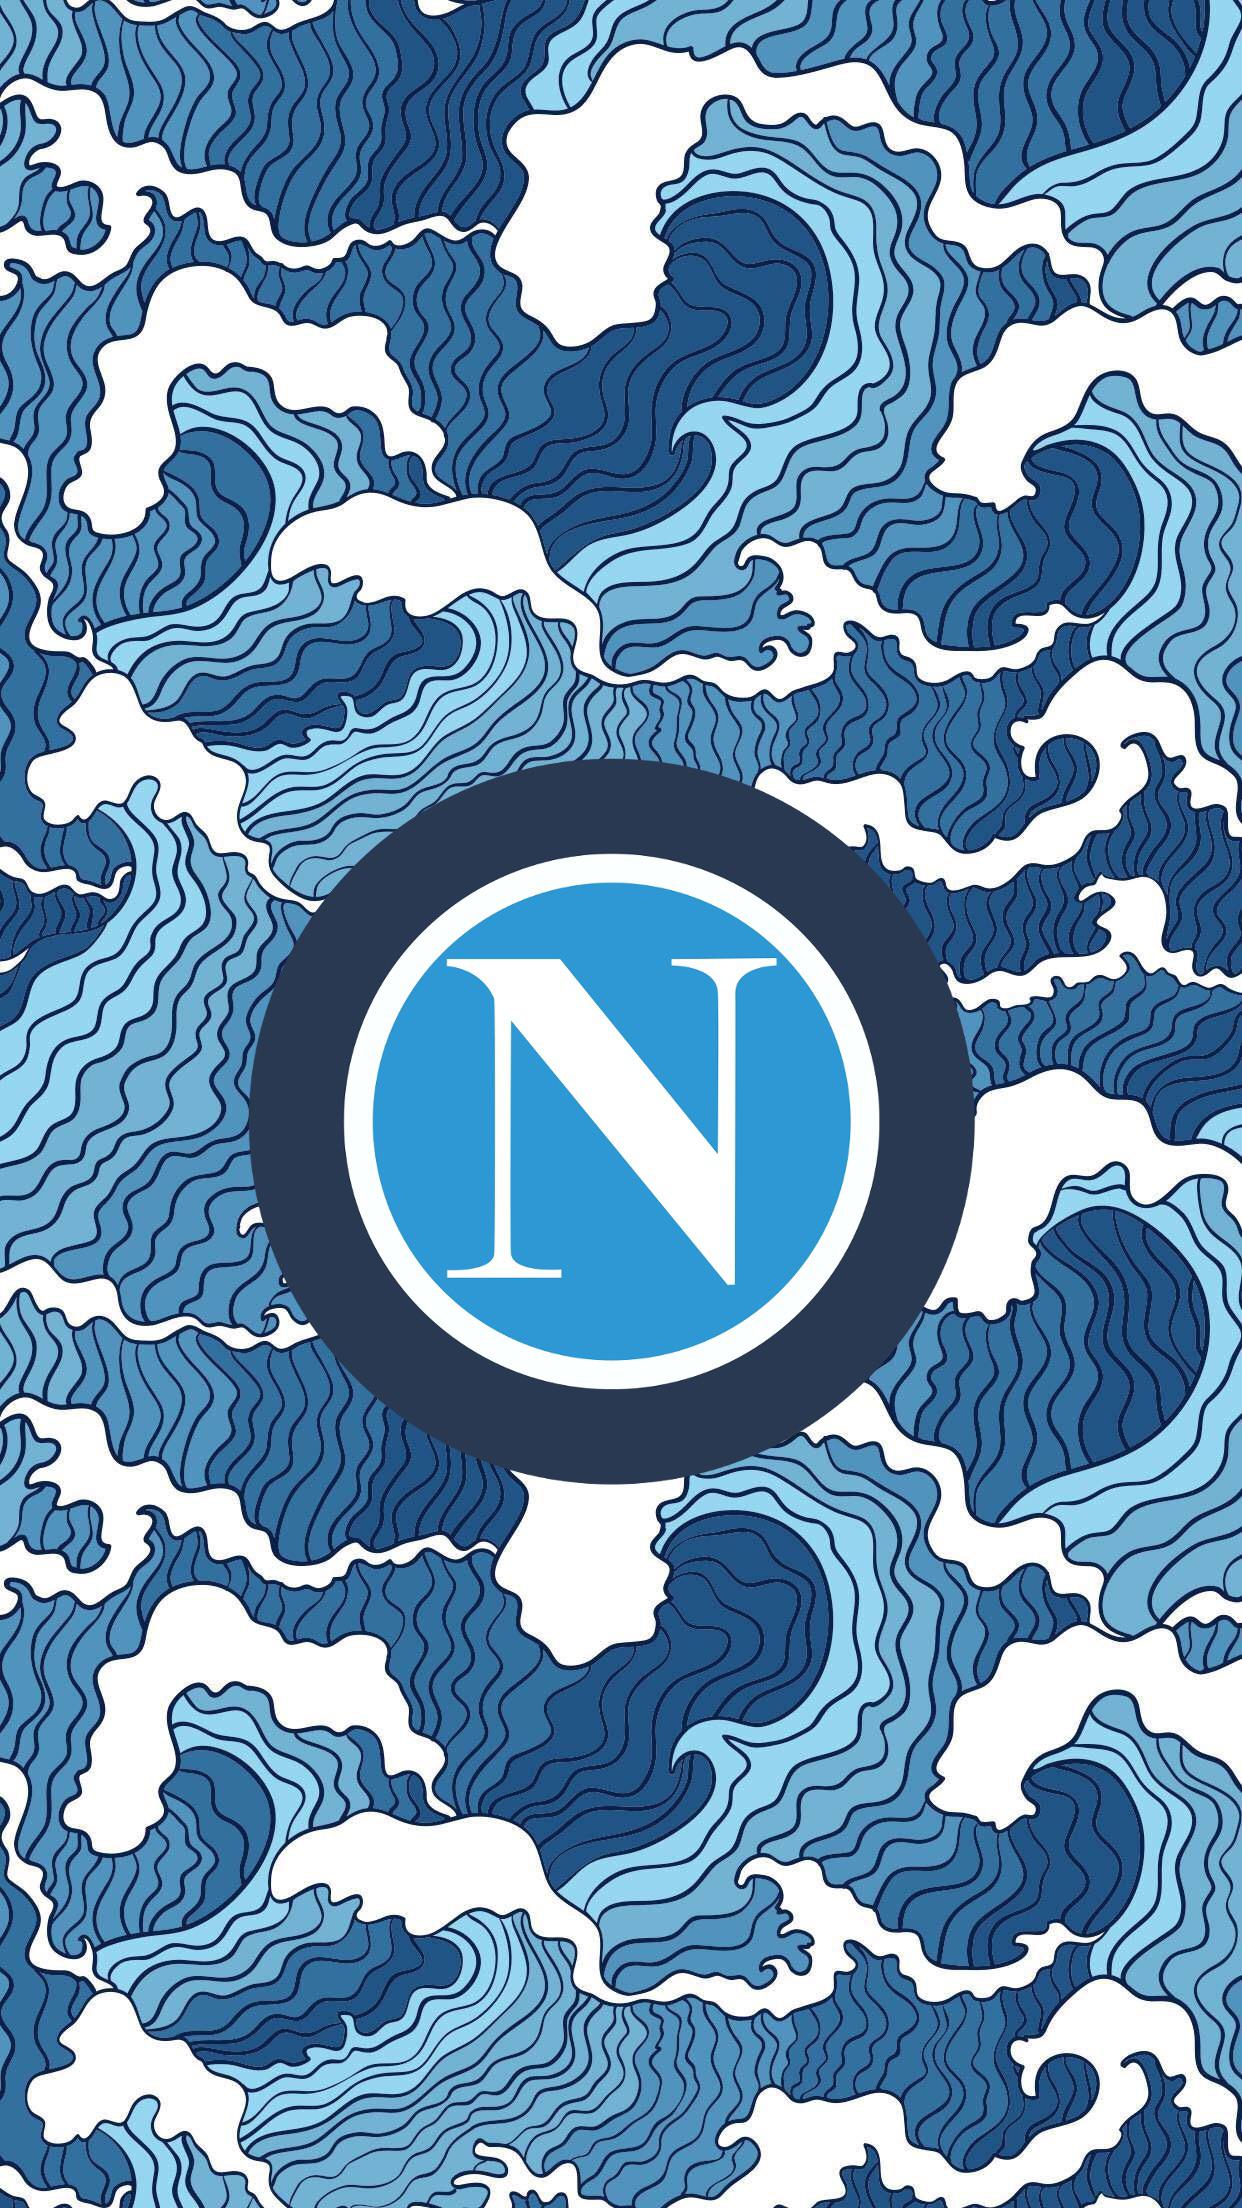 I Ve Made A Napoli Wallpaper For You Guys R Sscnapoli